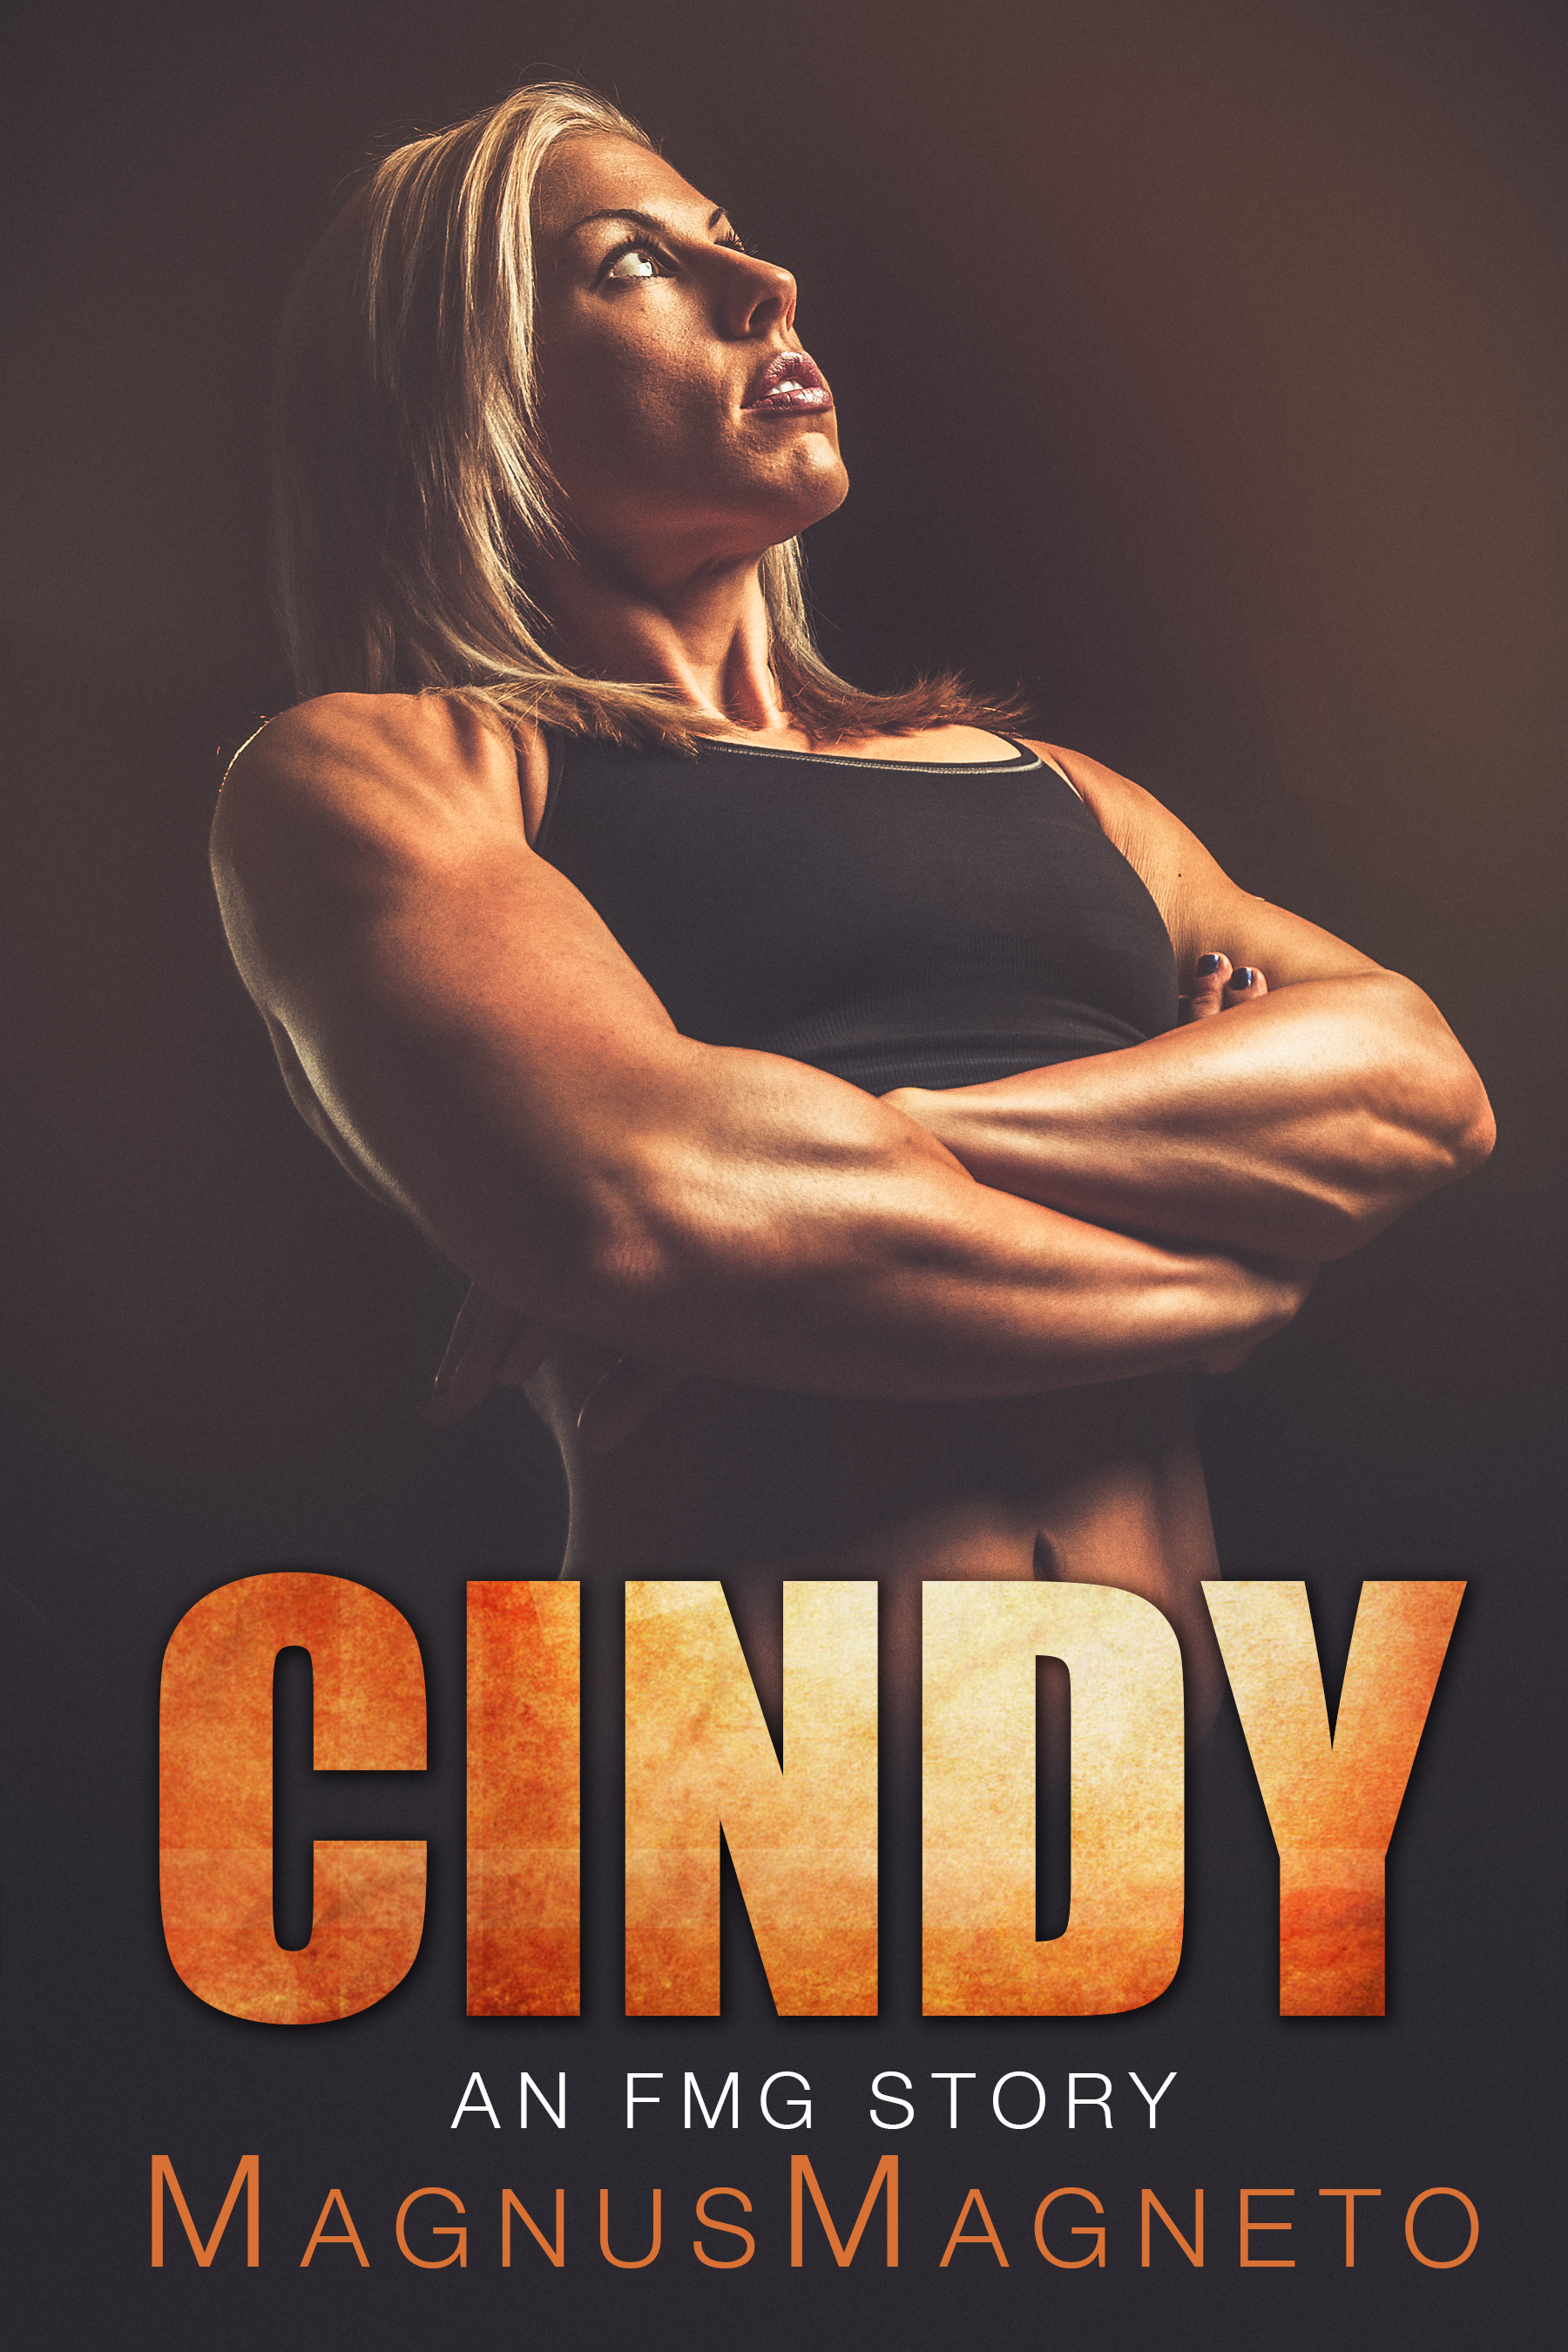 Female Muscle Growth Story Cindy by MagnusMagneto